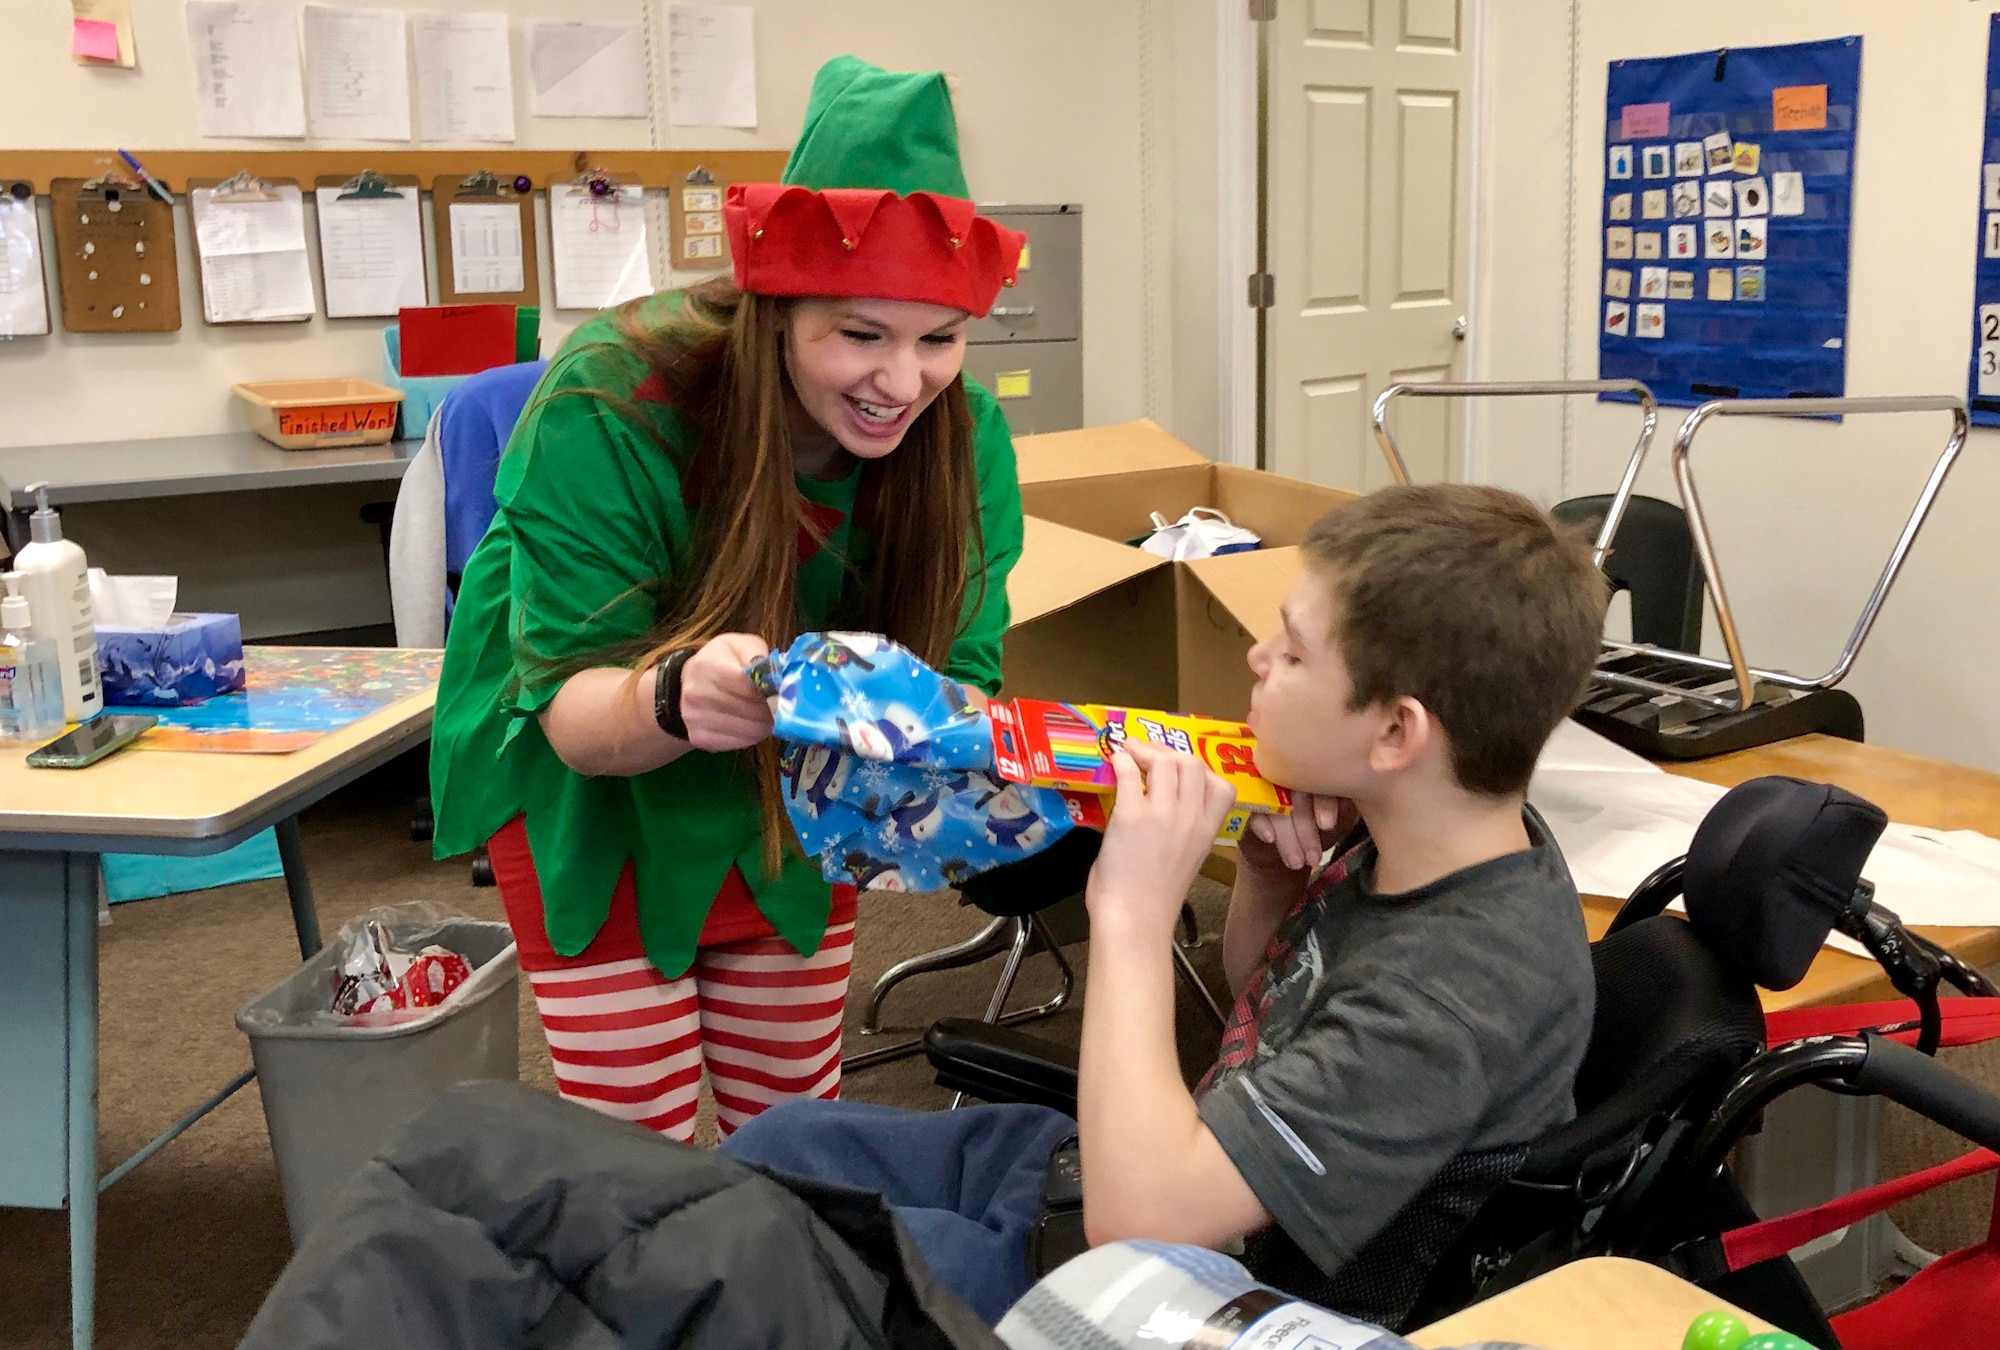 Senior Airman Amy Barnes, 67th Aerial Port Squadron, helps Andrew unwrap gifts during a Christmas party at Mound Fort Junior High in Ogden